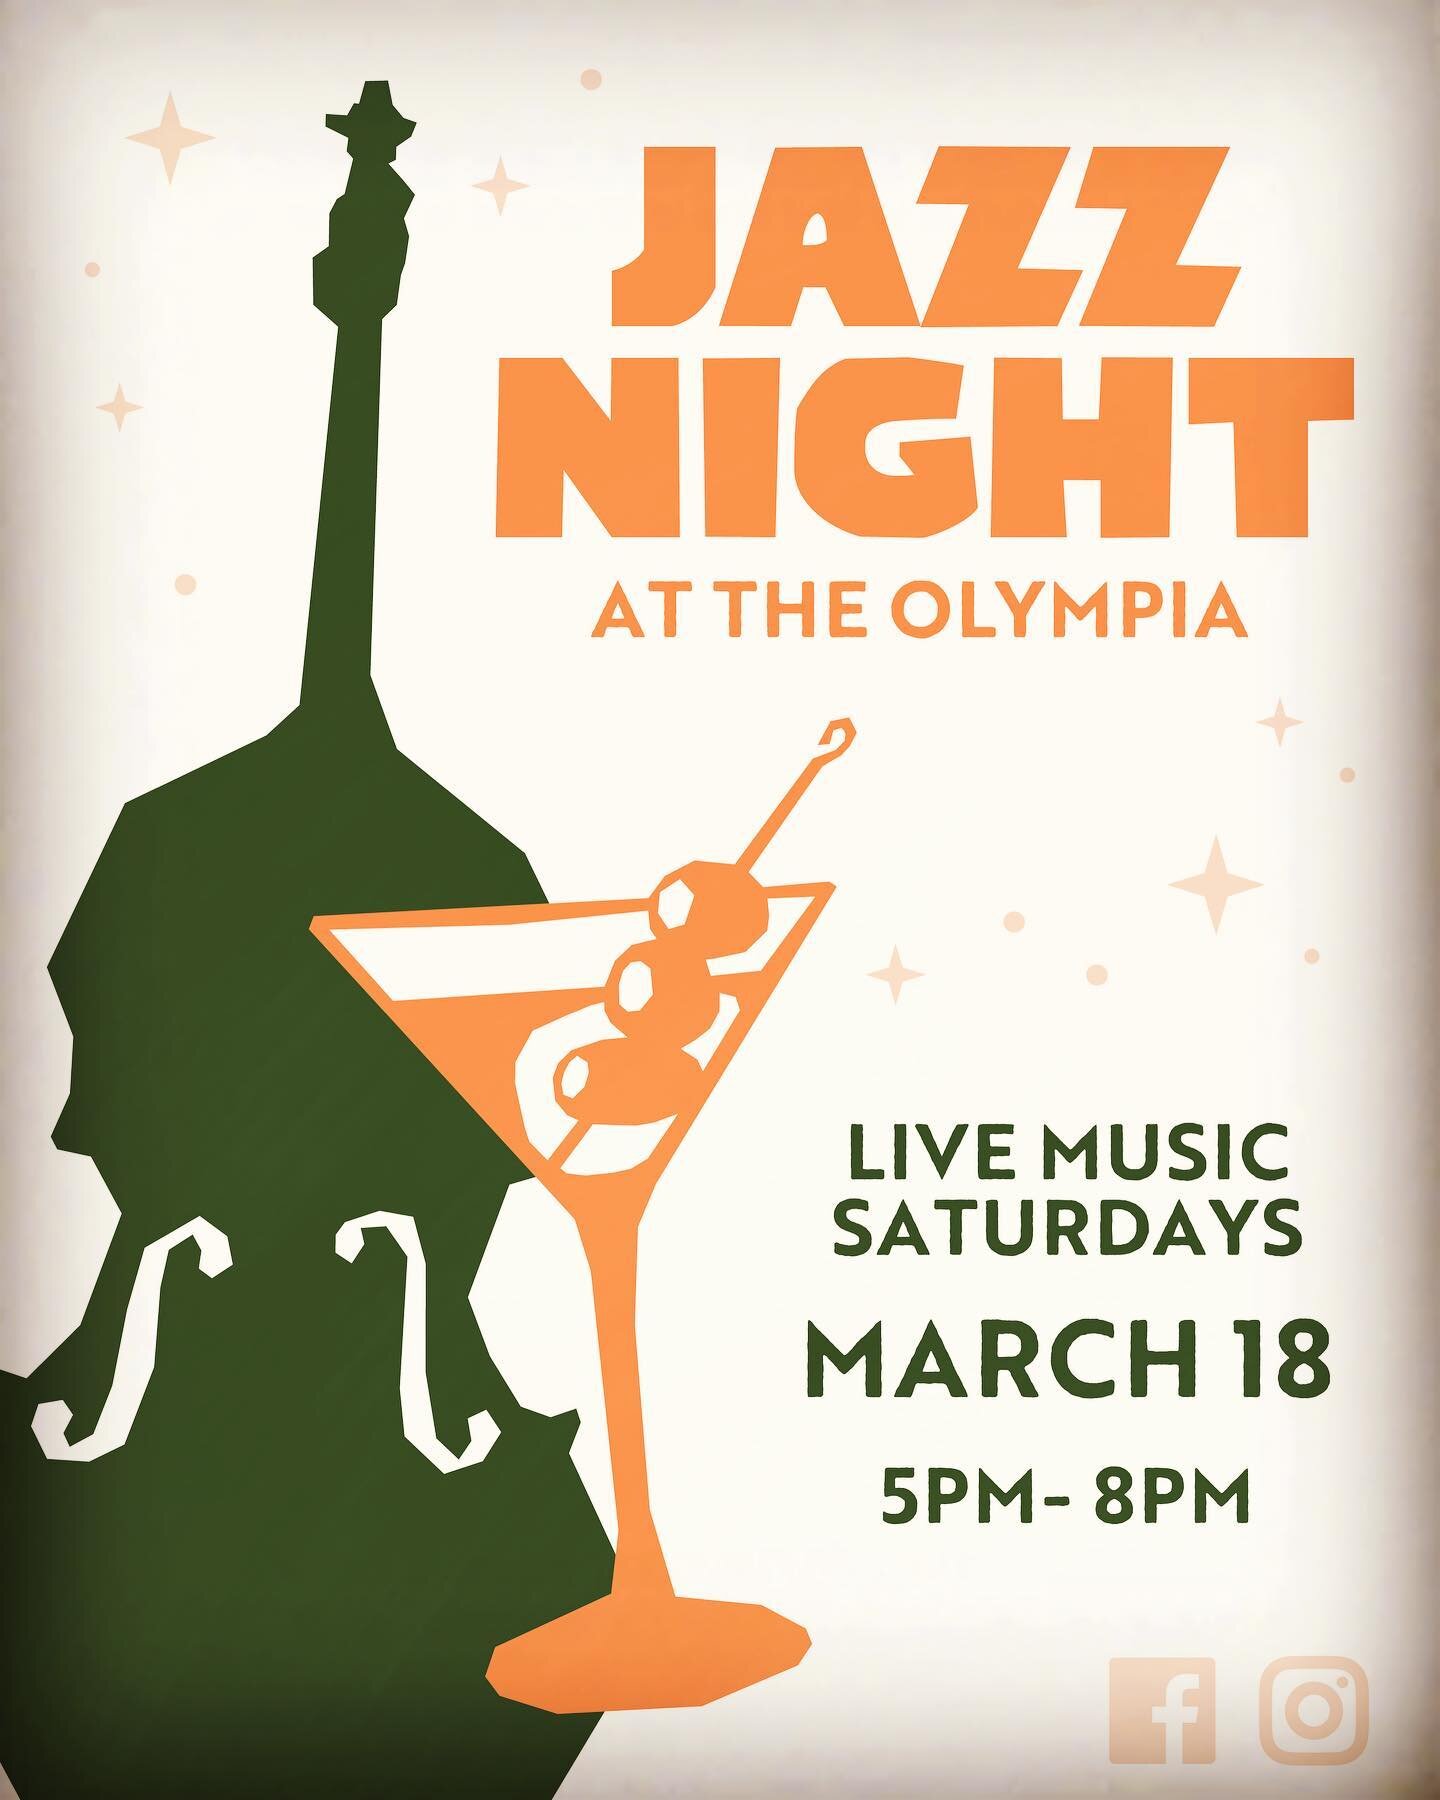 Join us for the next upcoming Jazz Night friends!